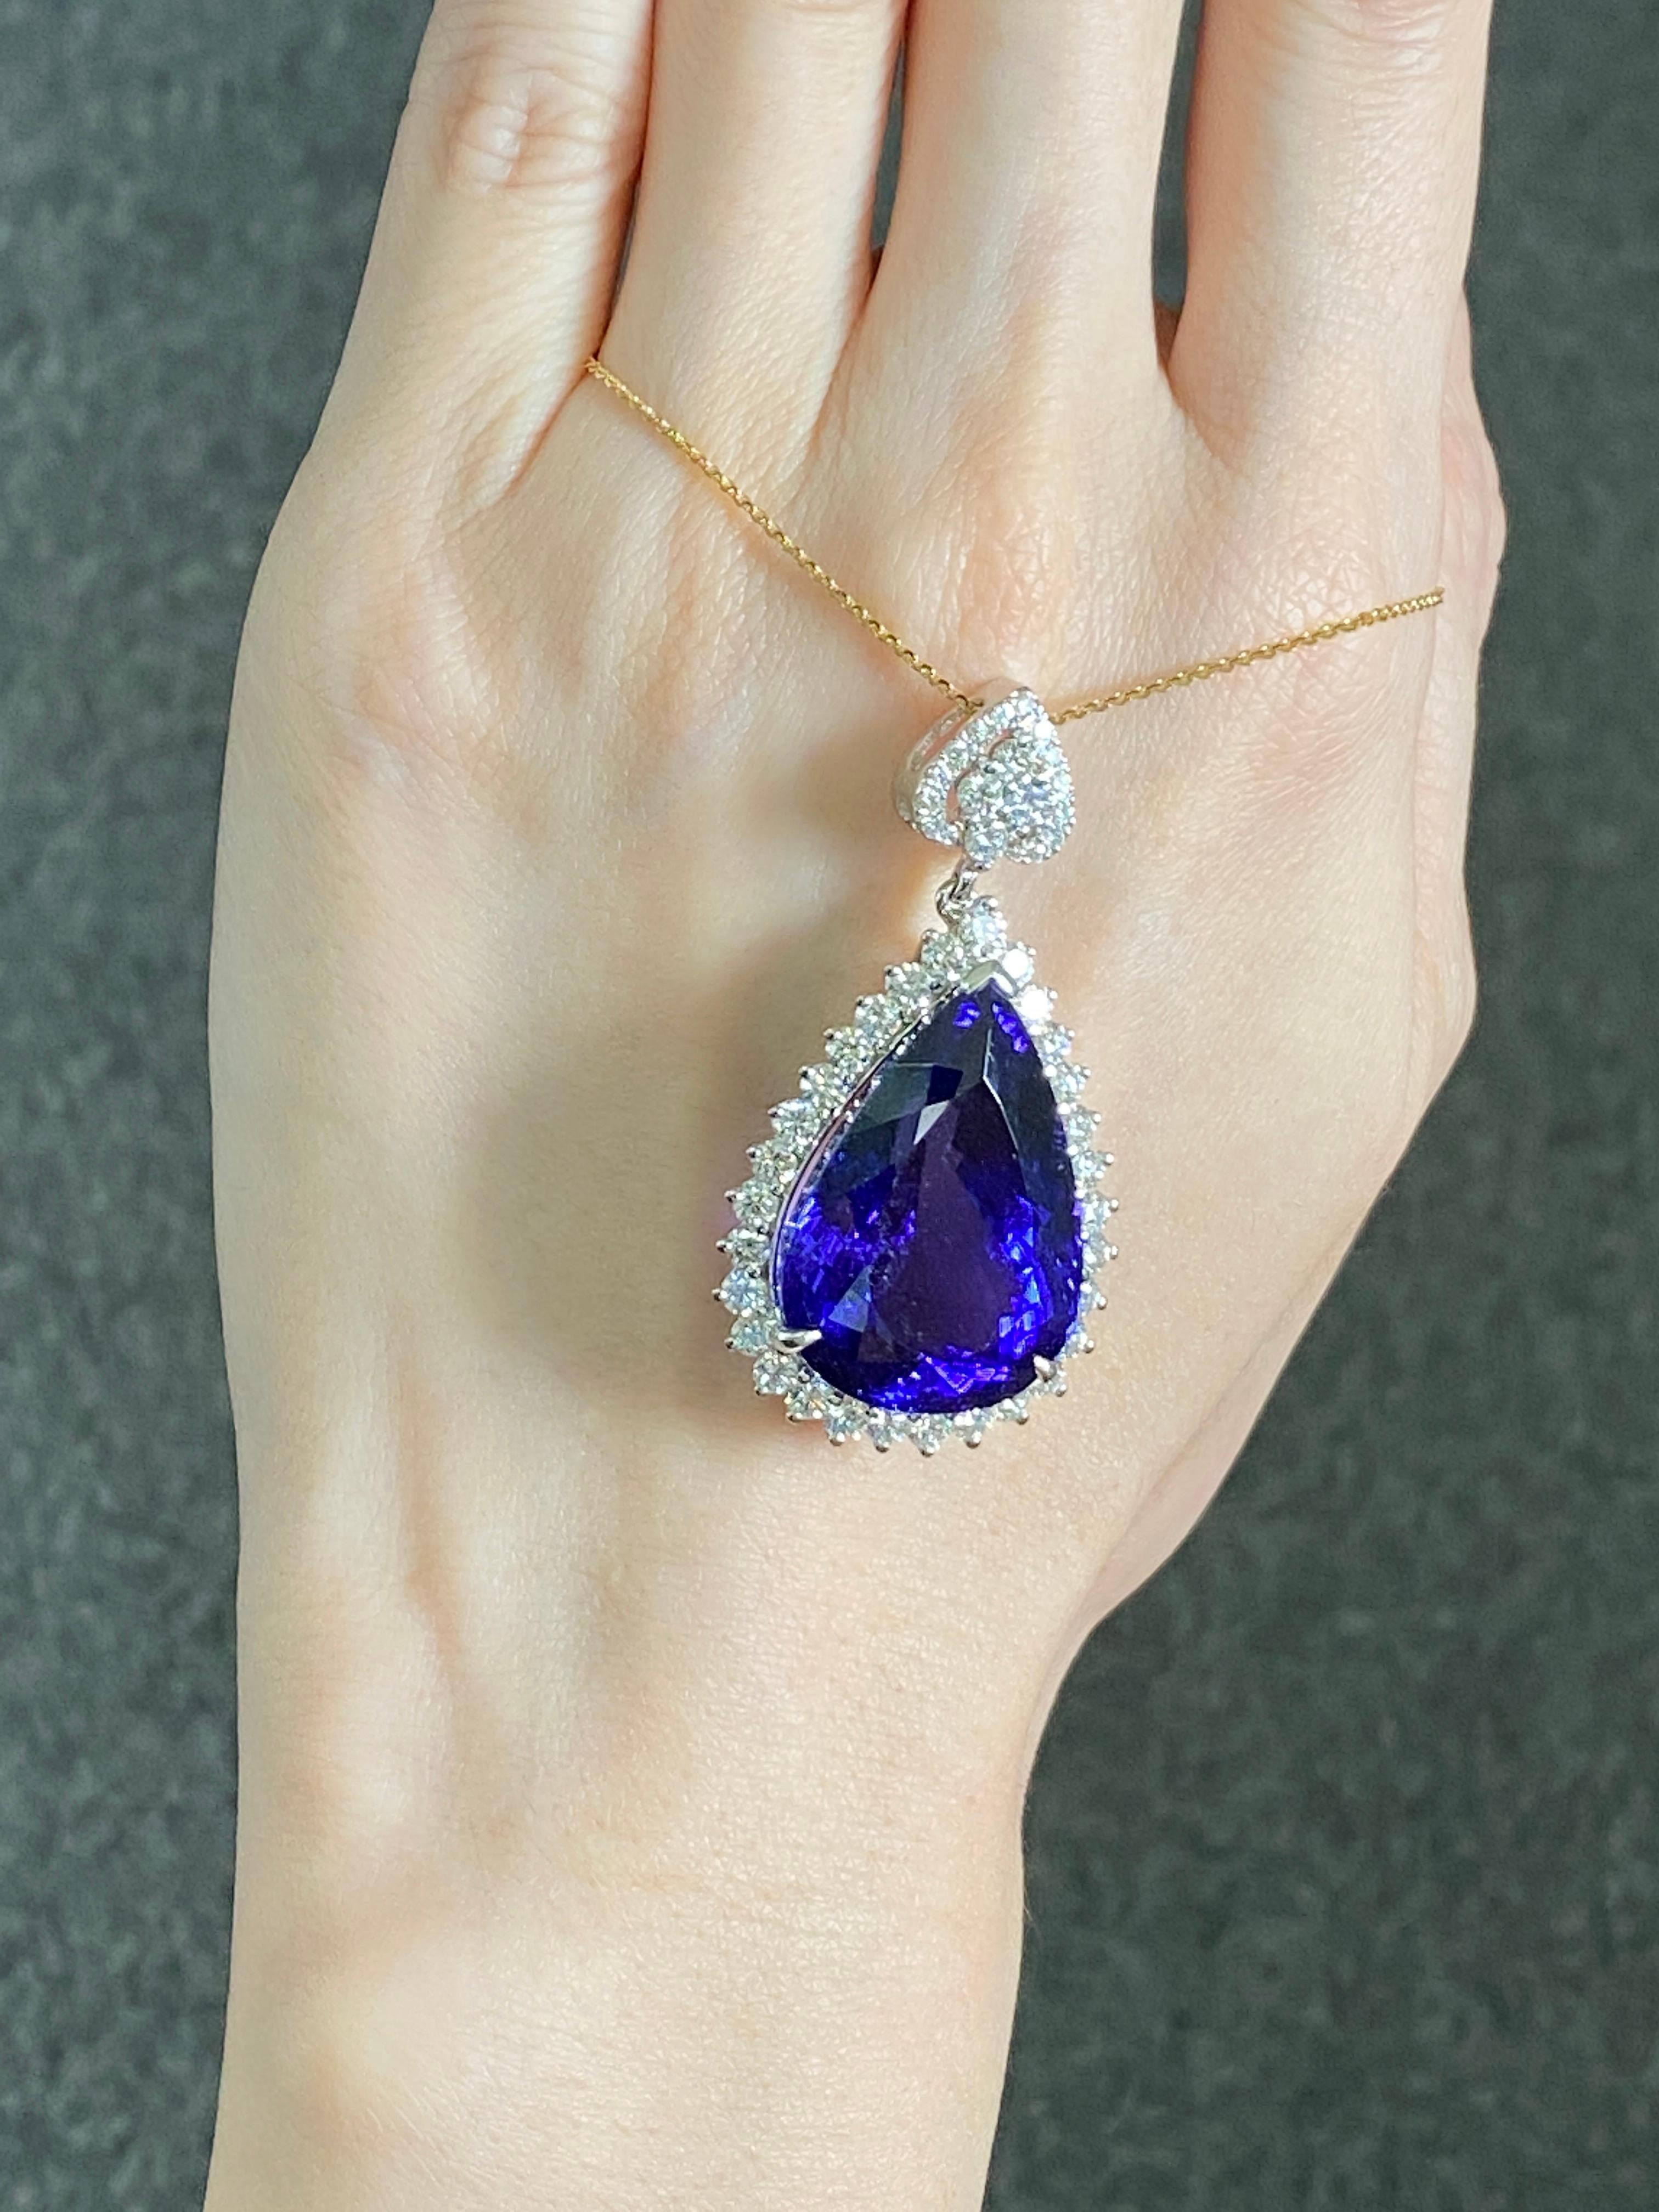 Women's Natural 18K White Gold 44.7 Carat Tanzanite Pendent Necklace with Cert, Rare For Sale